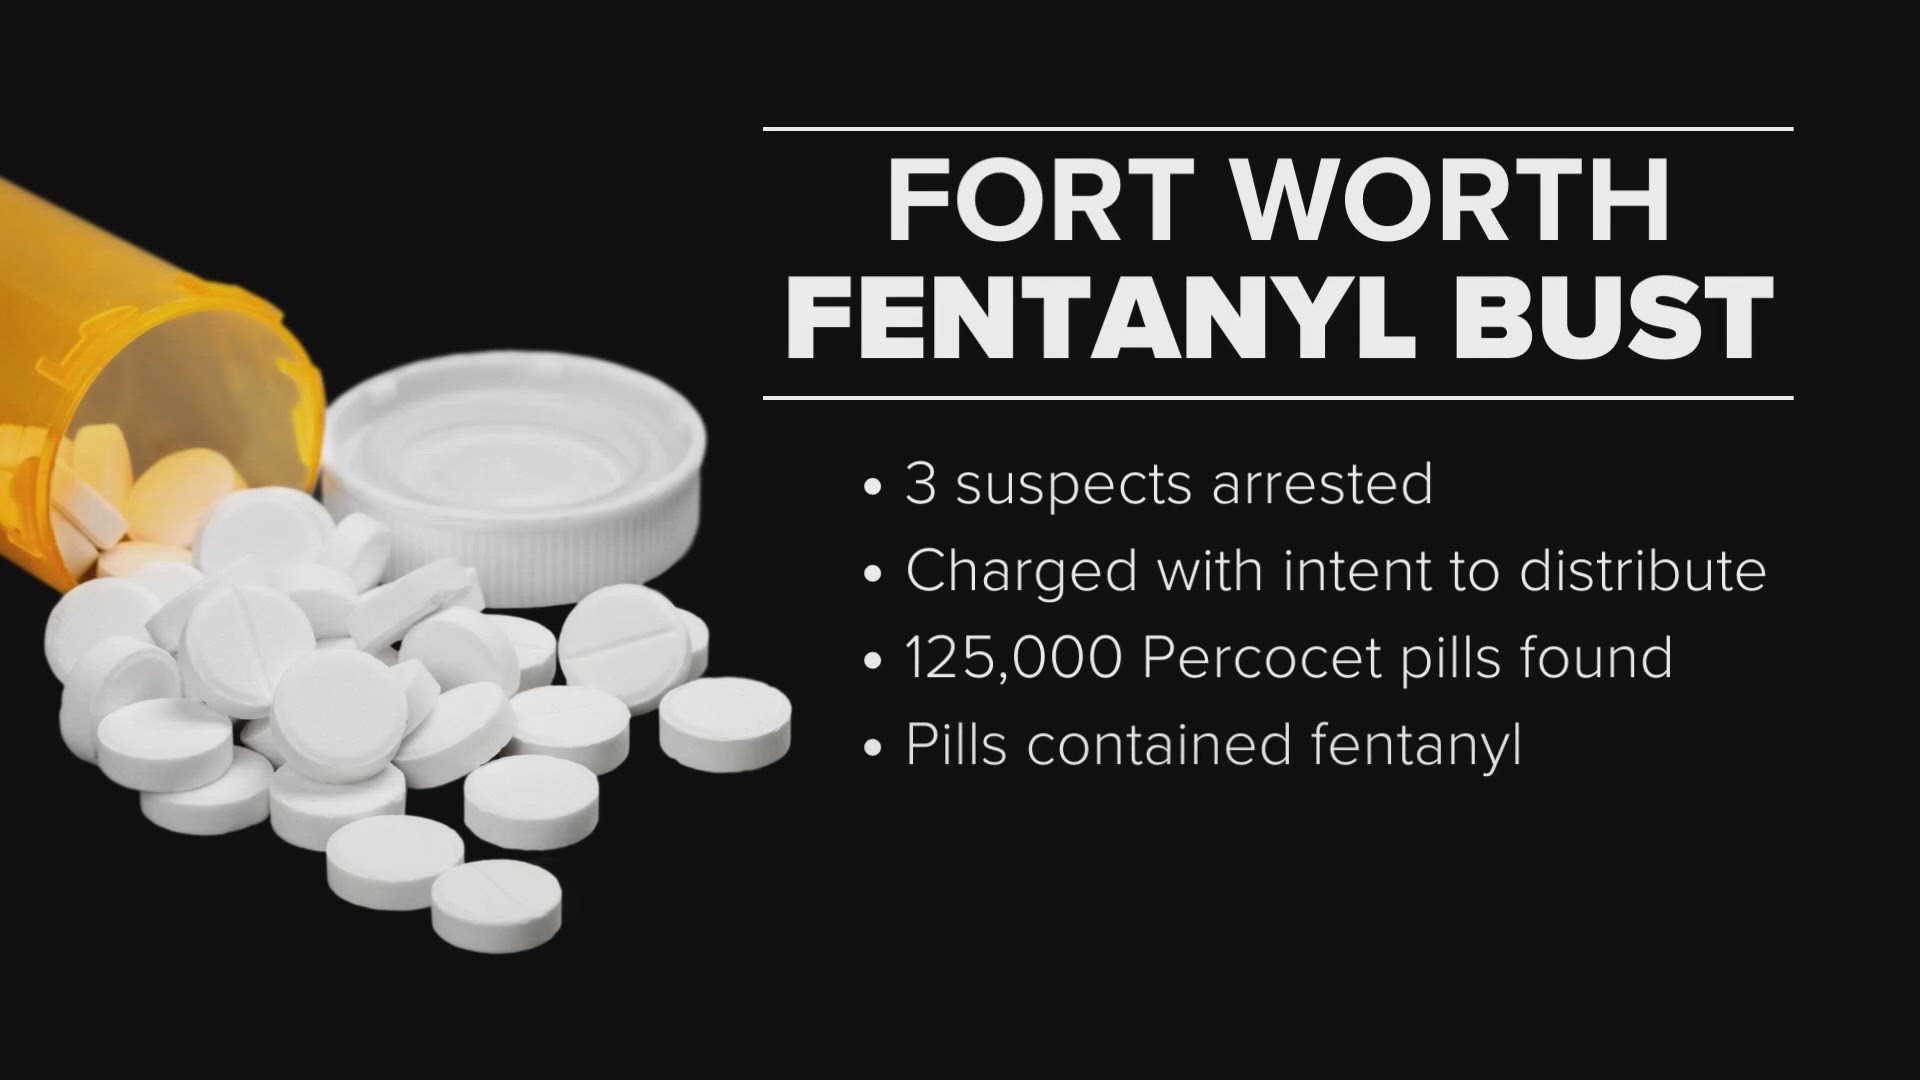 Federal officials charged the suspects with possession with intent to distribute at least 400 grams of a mixture and substance containing fentanyl.